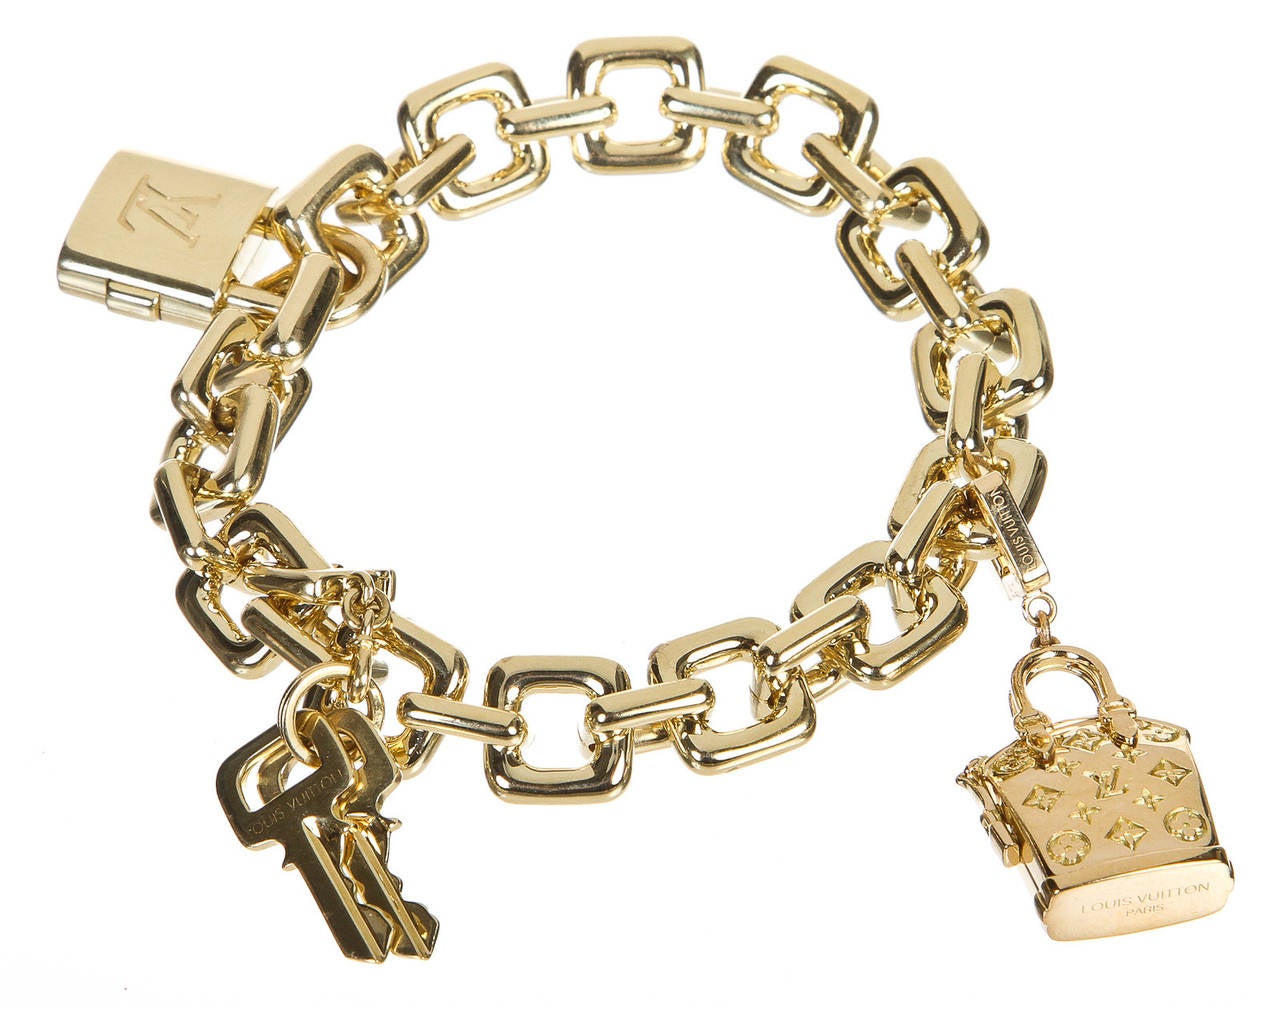 Luxuriate yourself or a loved one with this fabulous Louis Vuitton bracelet! This stunning piece can be worn year-round, bringing high fashion to your outfits daily. This marvelous item features a gold chain and an array of charms dangle for a